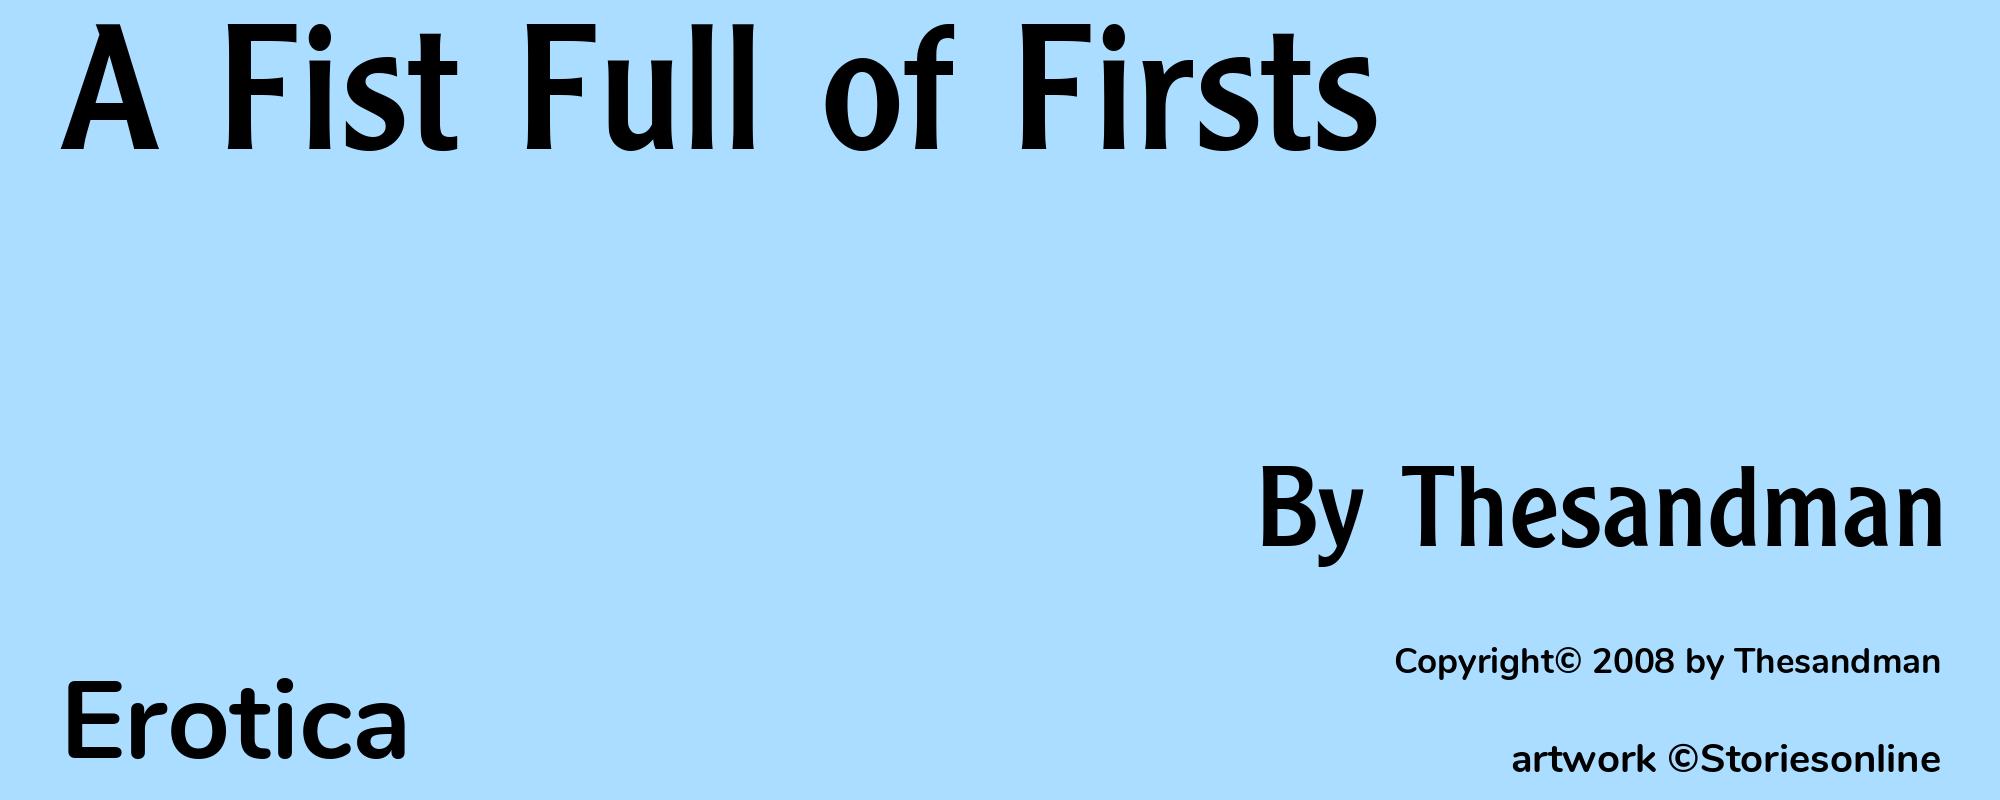 A Fist Full of Firsts - Cover